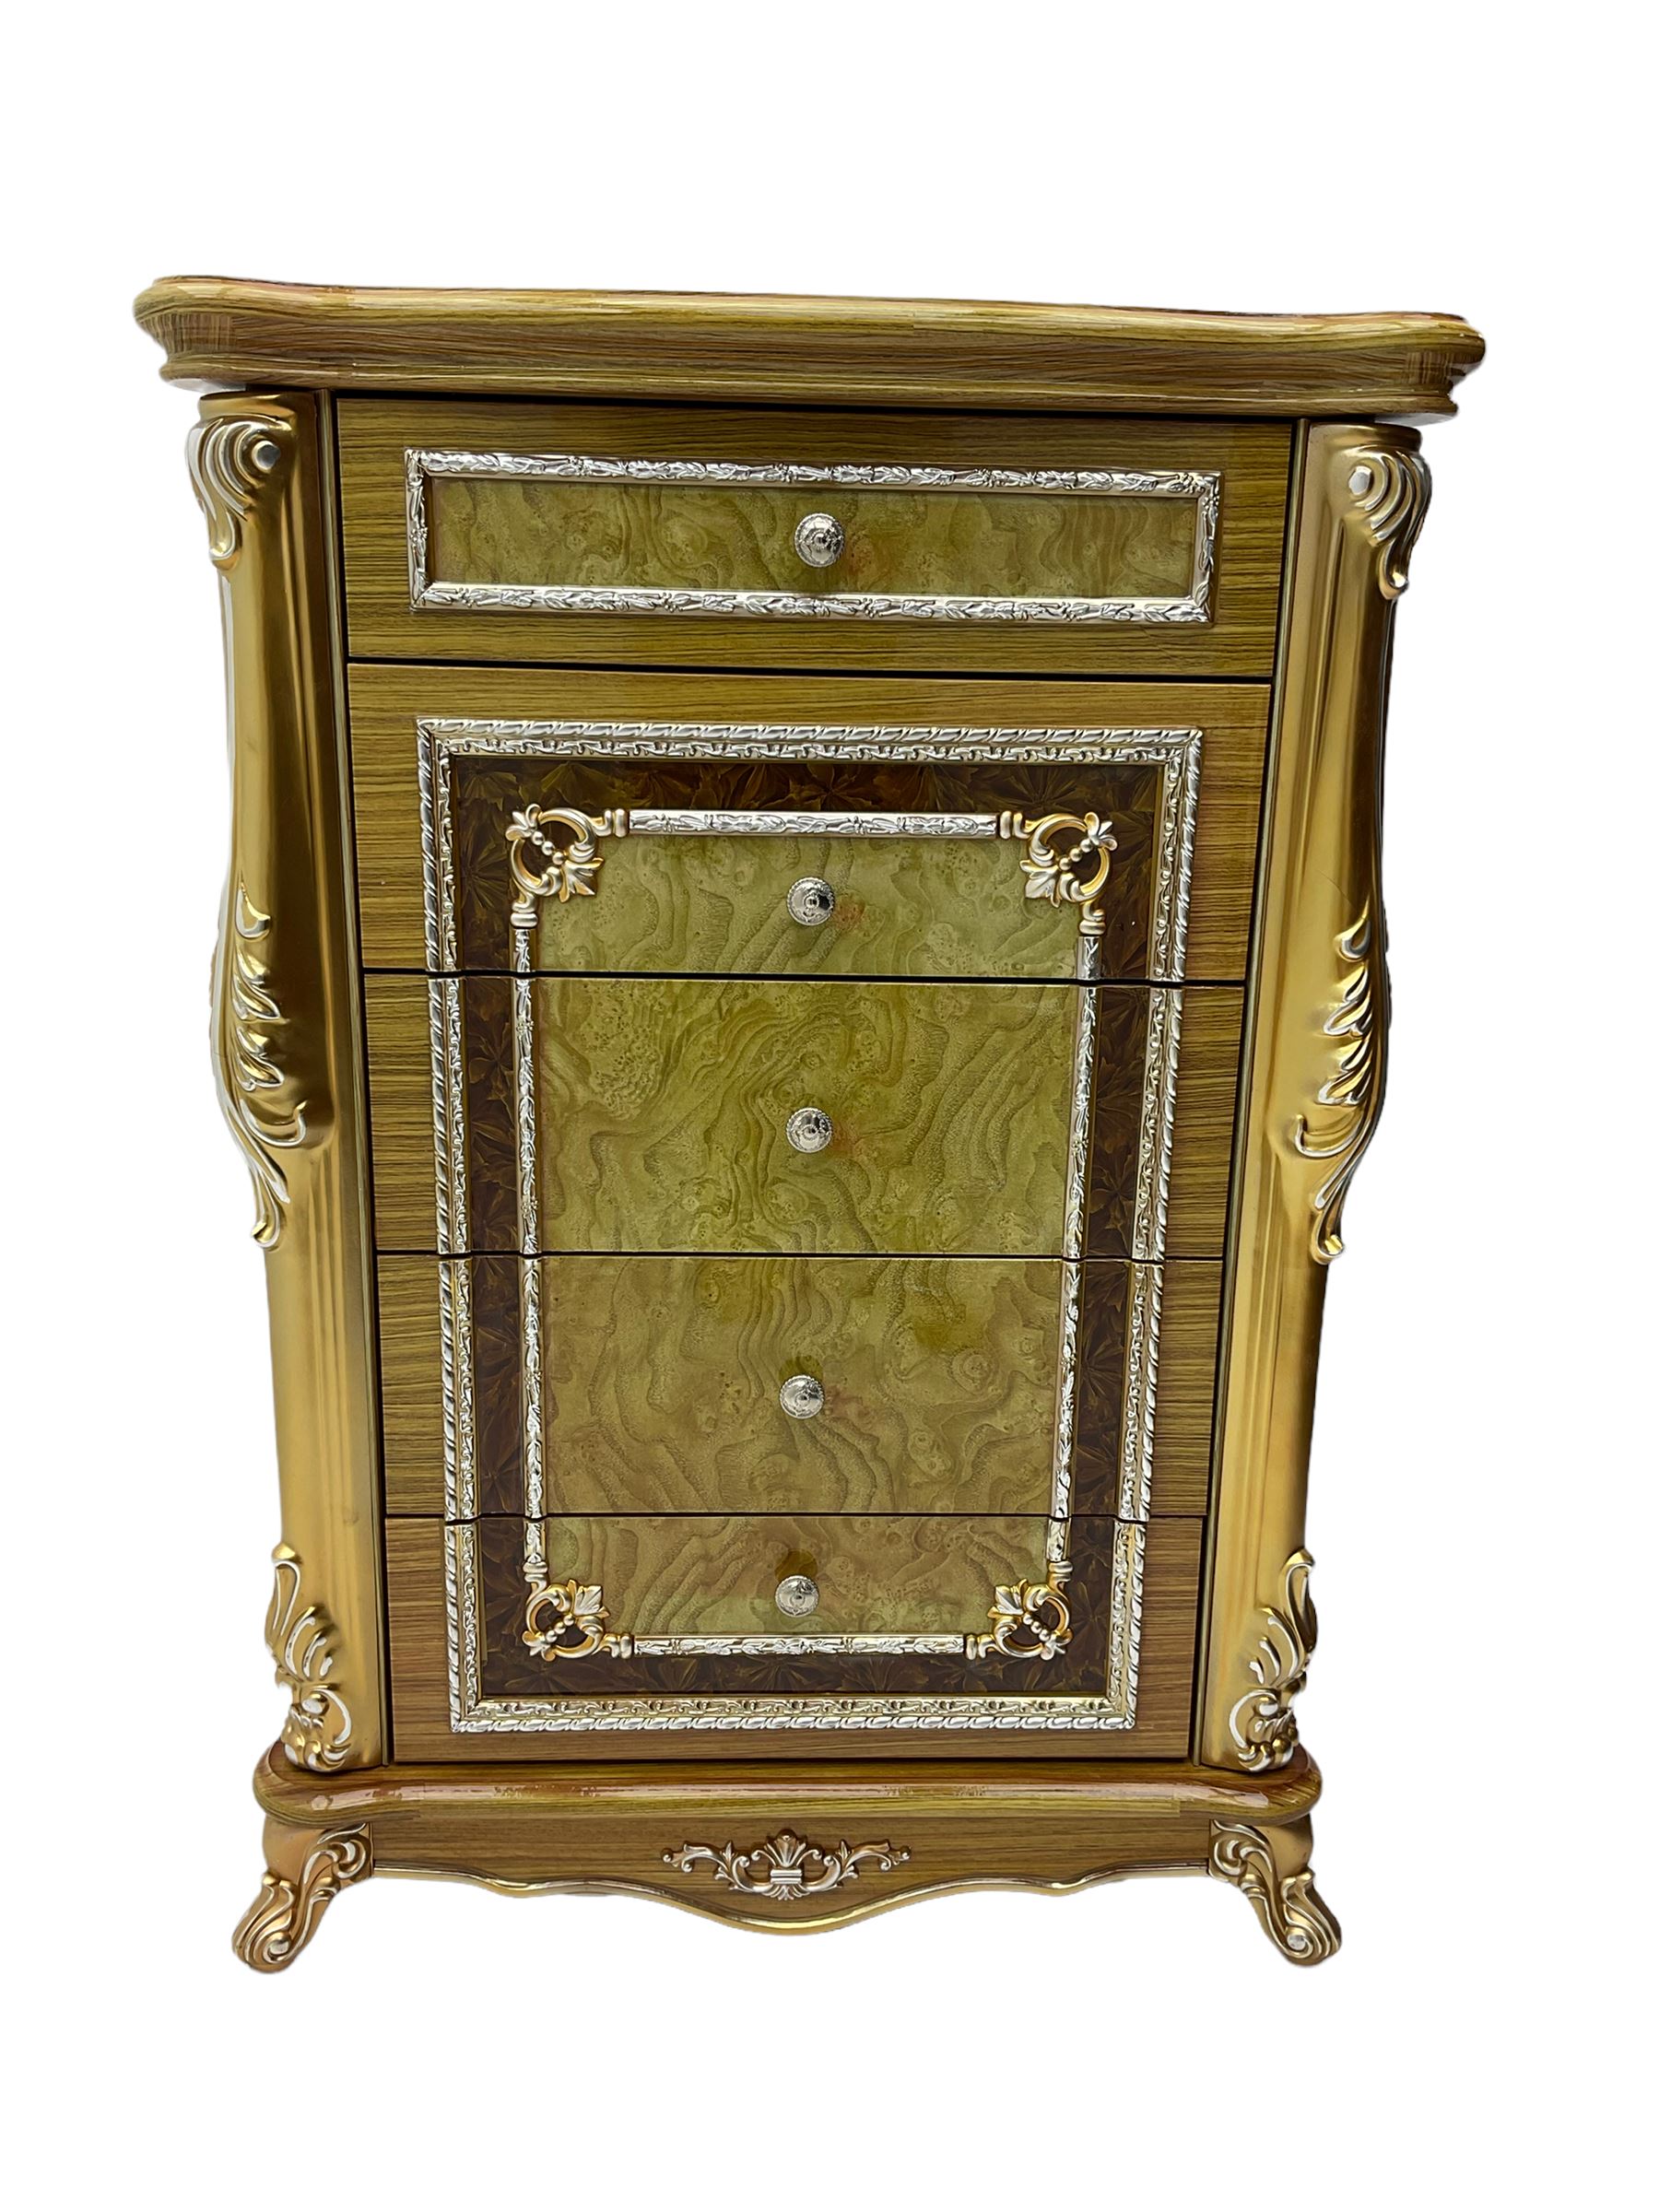 Rococo style wood finish chest